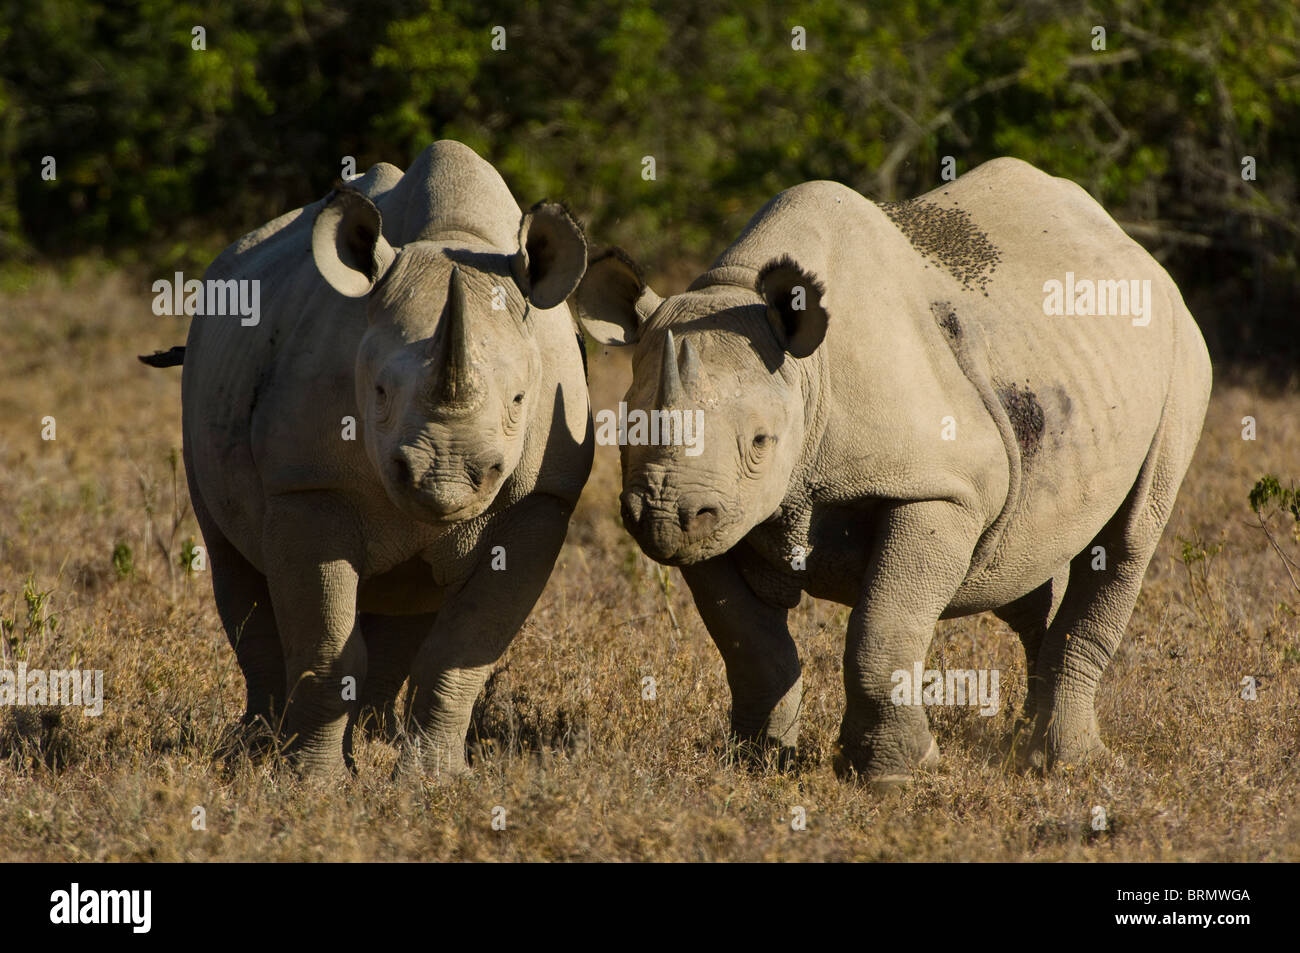 Two Black rhinoceros (Diceros bicornis michaeli) East African sub-species standing side by side Stock Photo